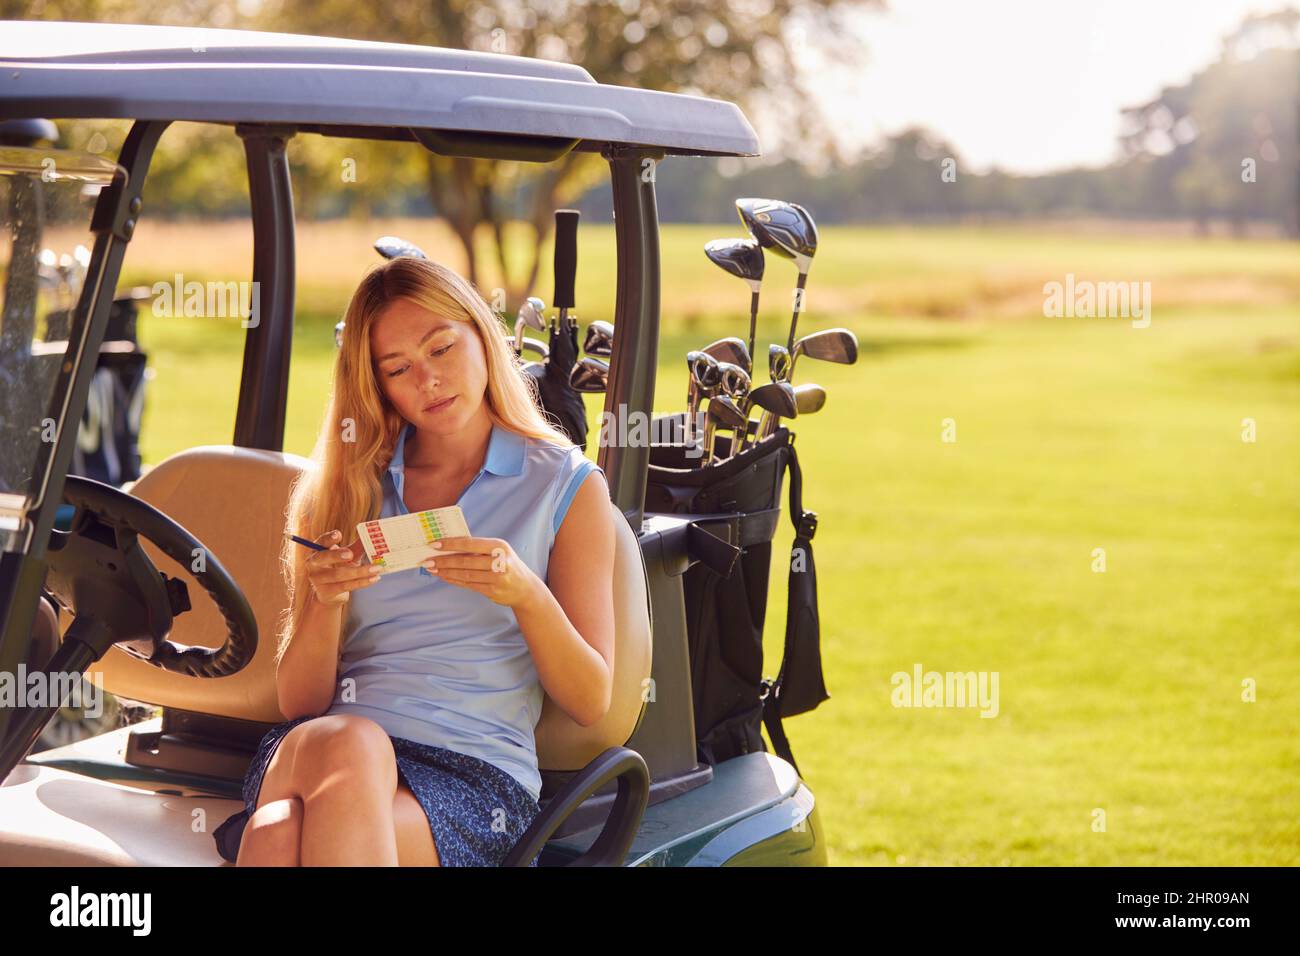 Woman Sitting In Buggy Playing Round On Golf And Checking Score Card Stock Photo